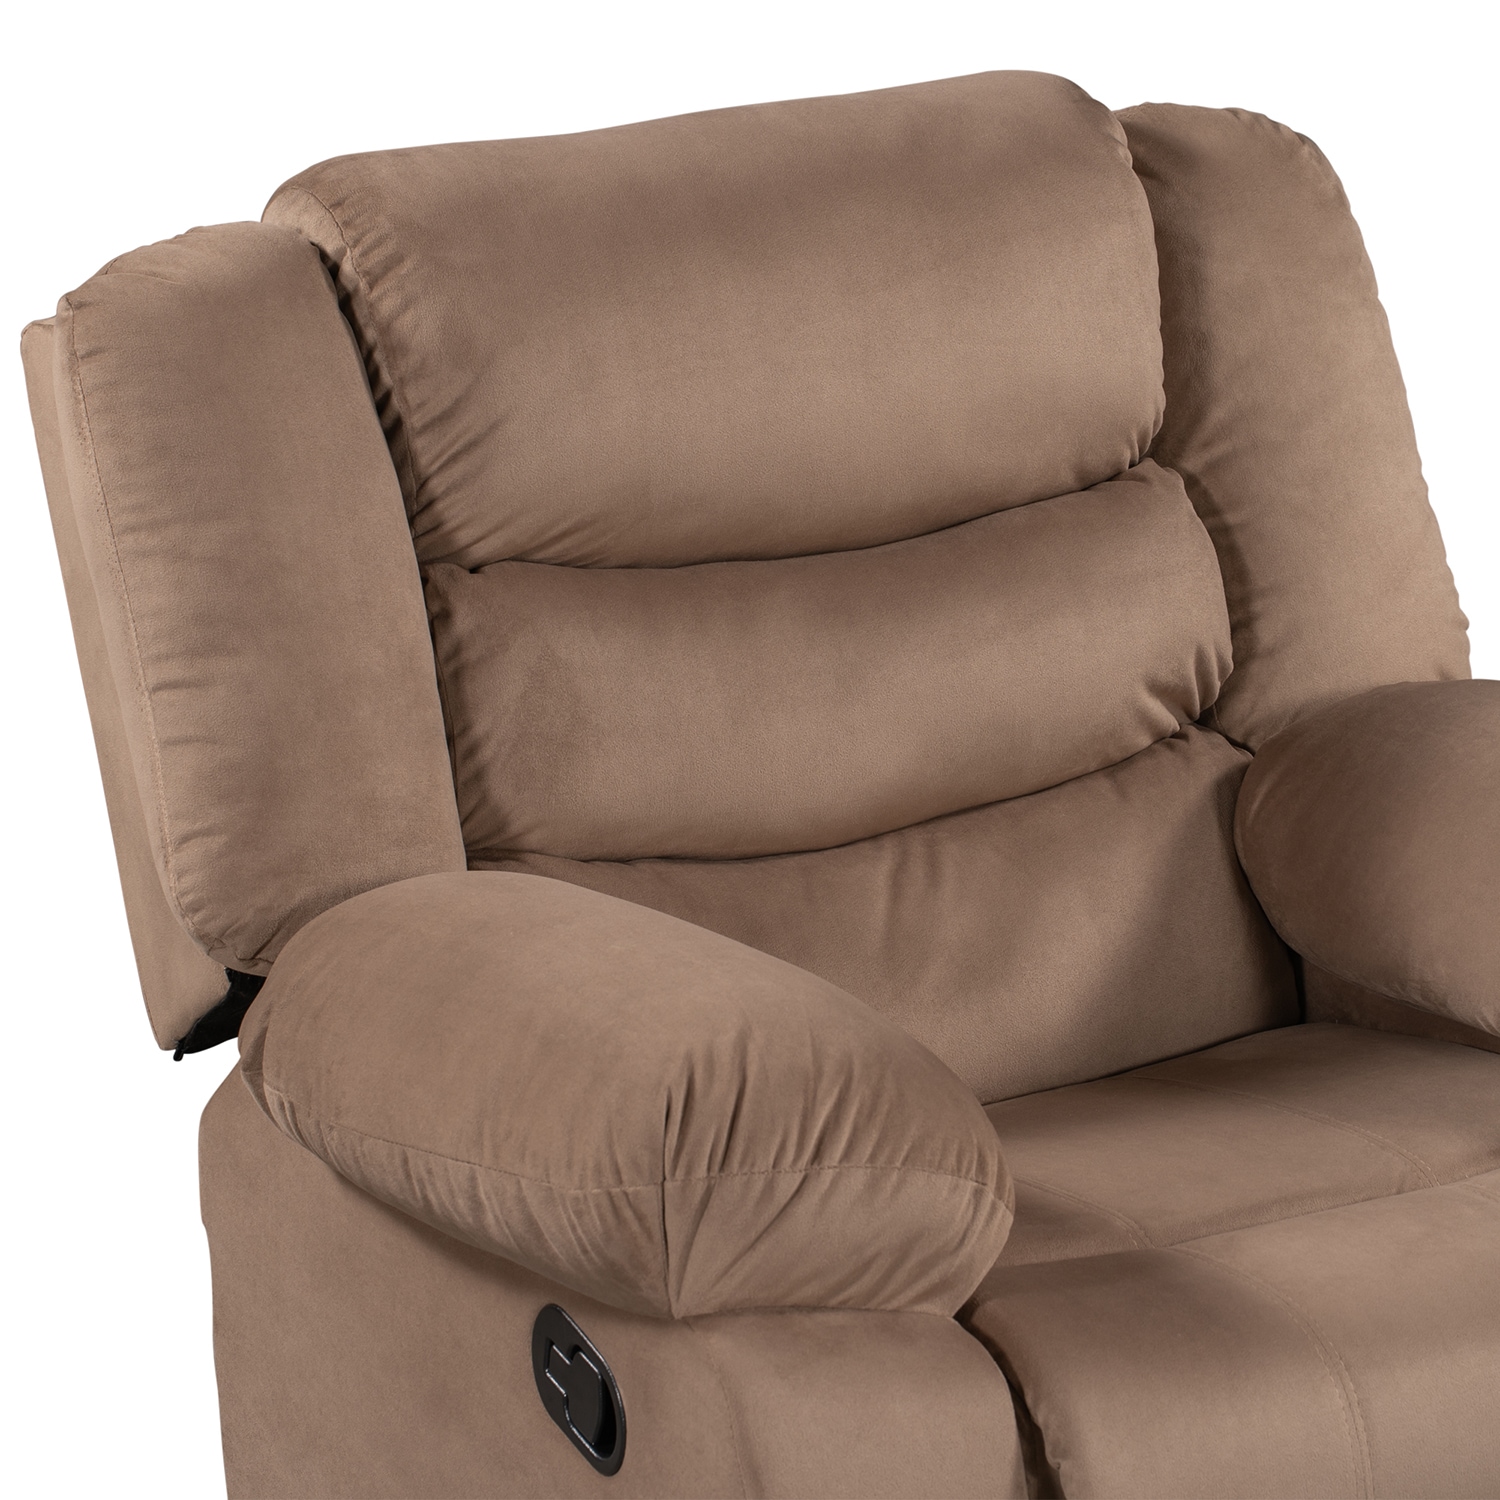 Microfiber Arm Chair Recliners Armchair Lazy Chairs Brown Beige Tan Recliner NEW 